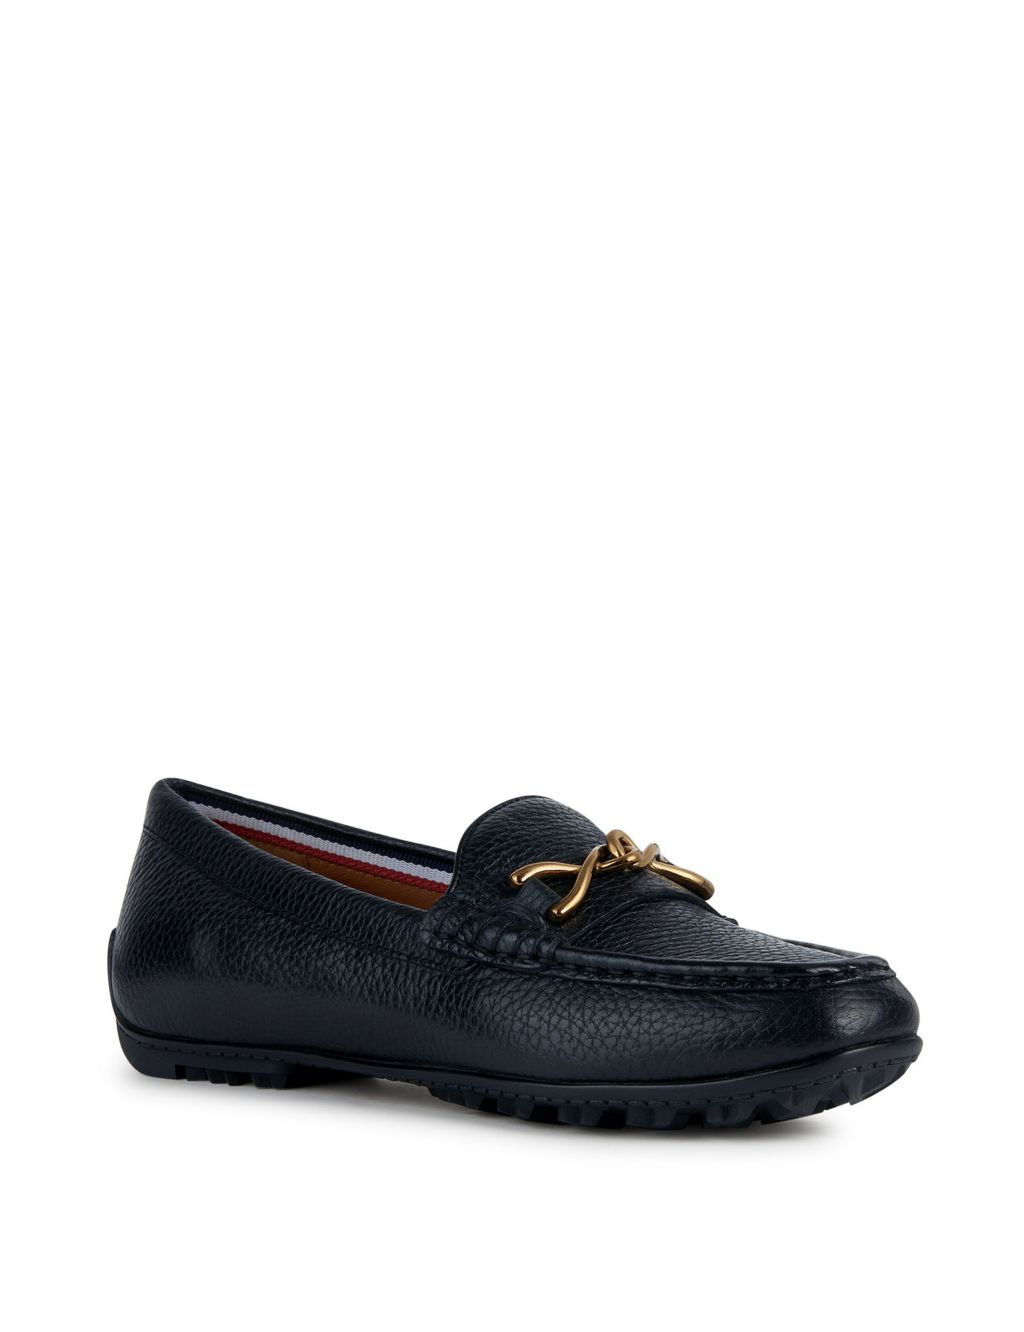 Leather Bar Slip On Flat Loafers 1 of 6